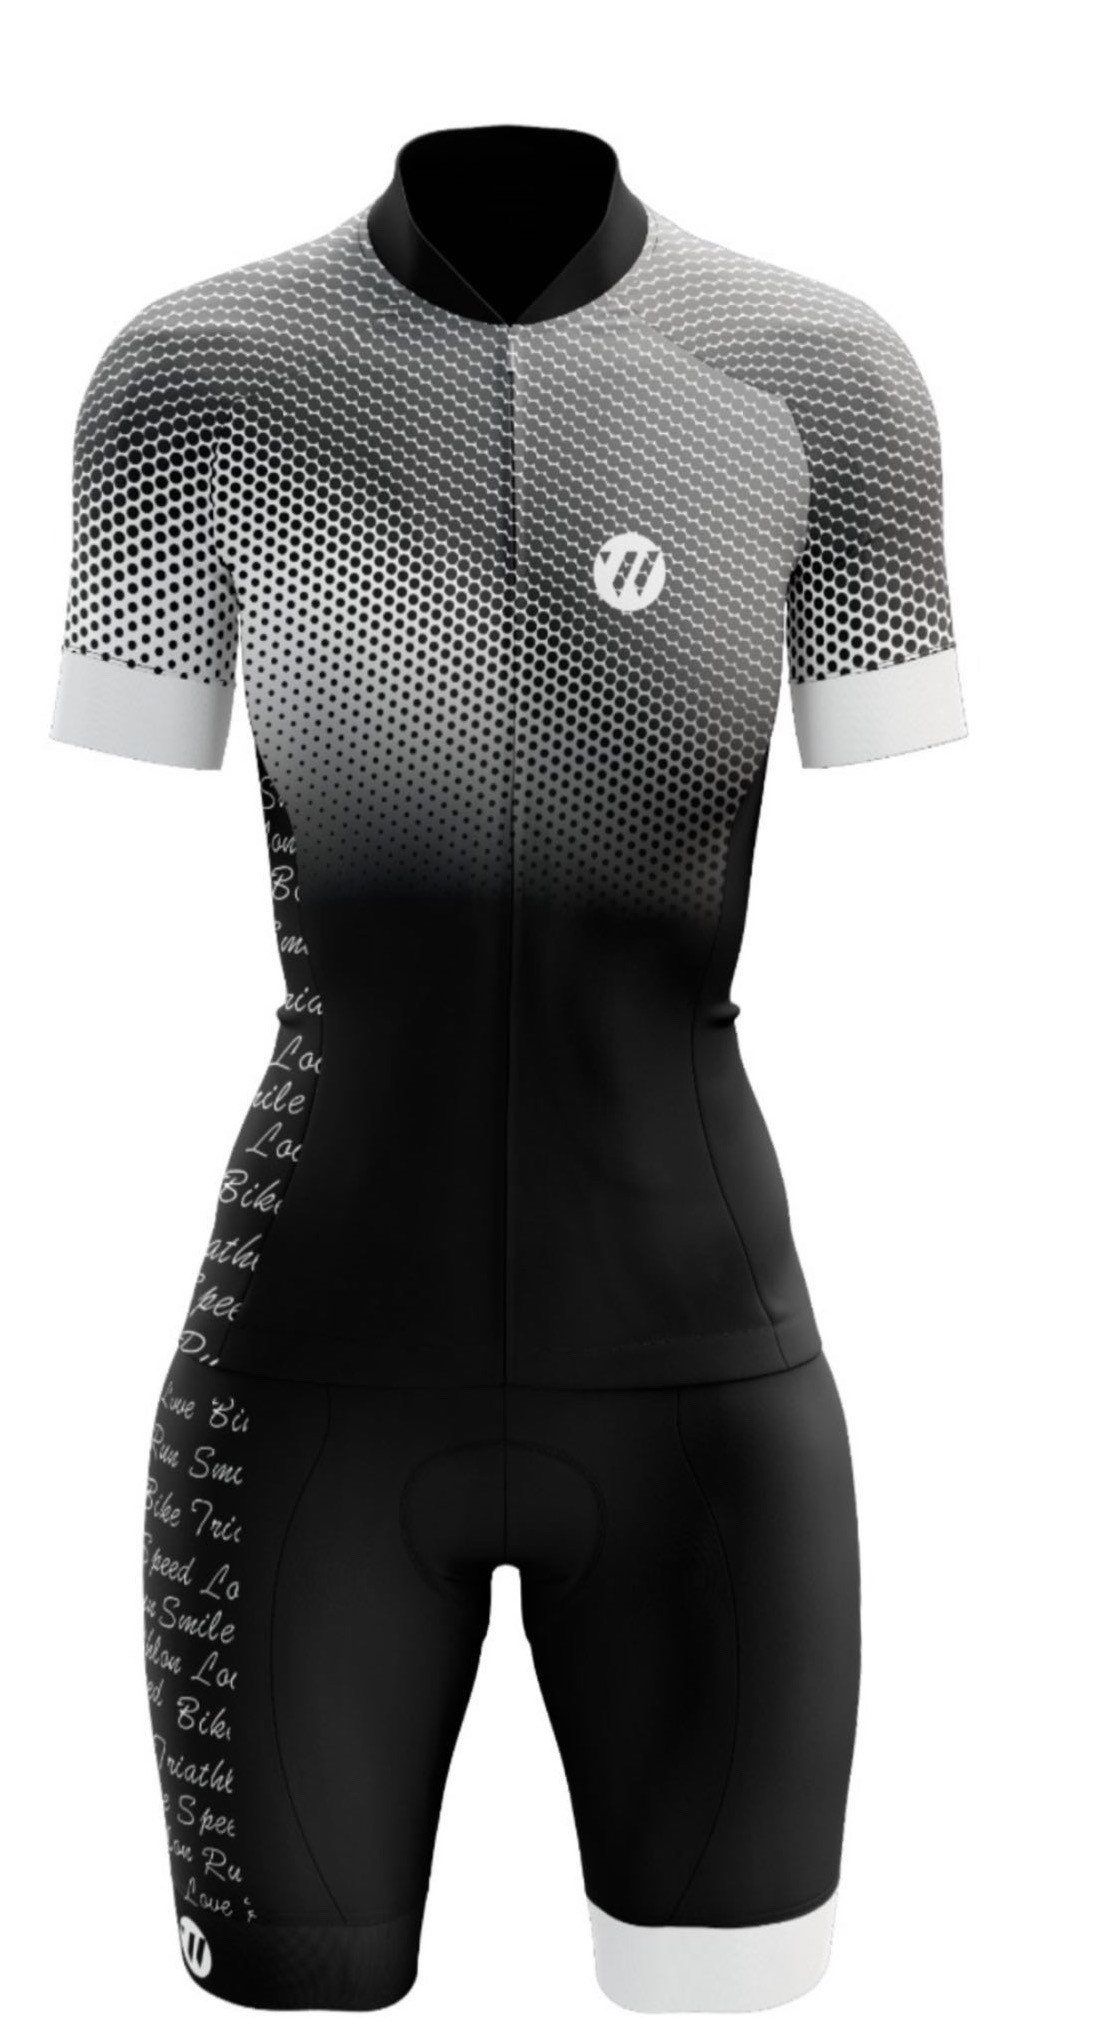 Download Black and white , Trisuit , Sports Apparel Template, Biker Jersey, Cycling Clothing Mockup, T ...